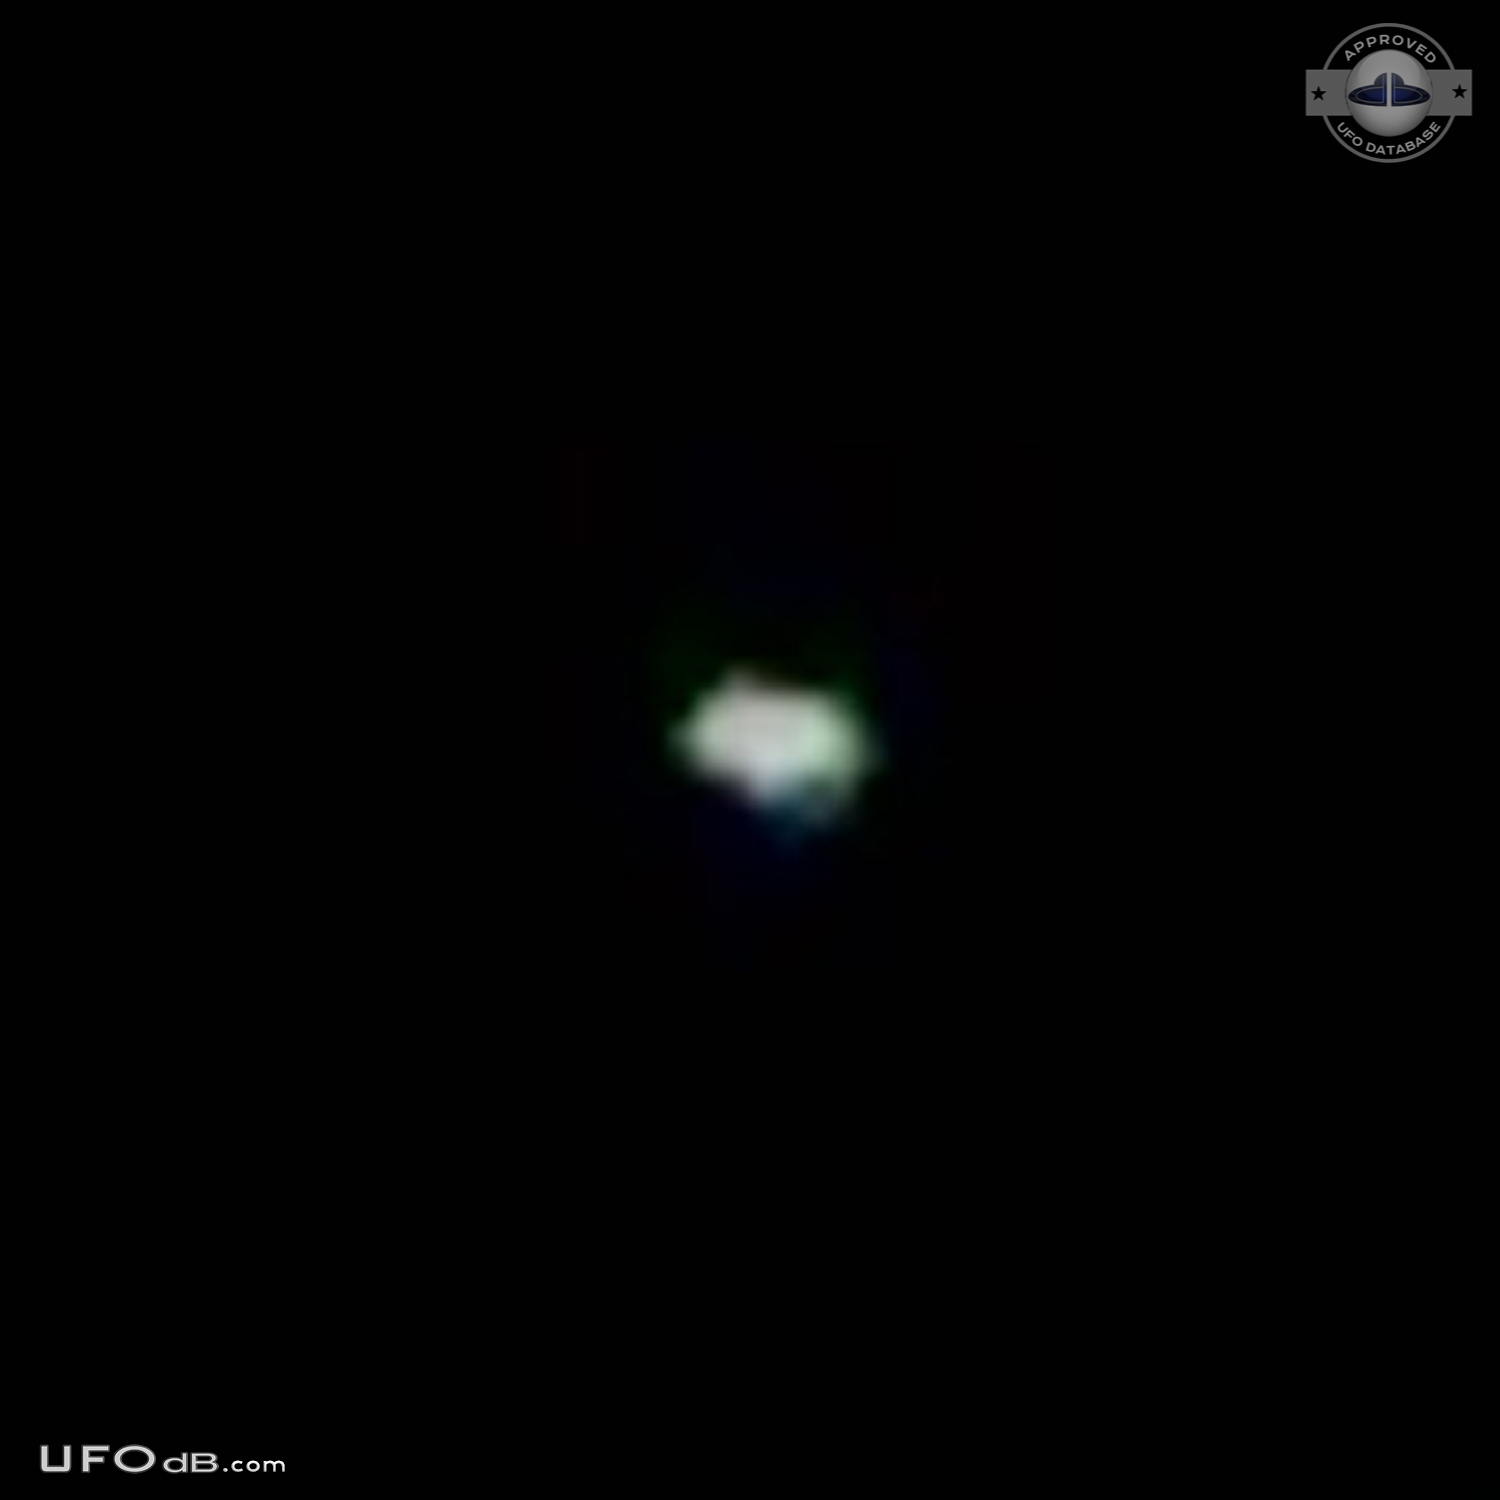 Extremely bright and beautiful UFOs seen in San Jose, California 2012 UFO Picture #537-3